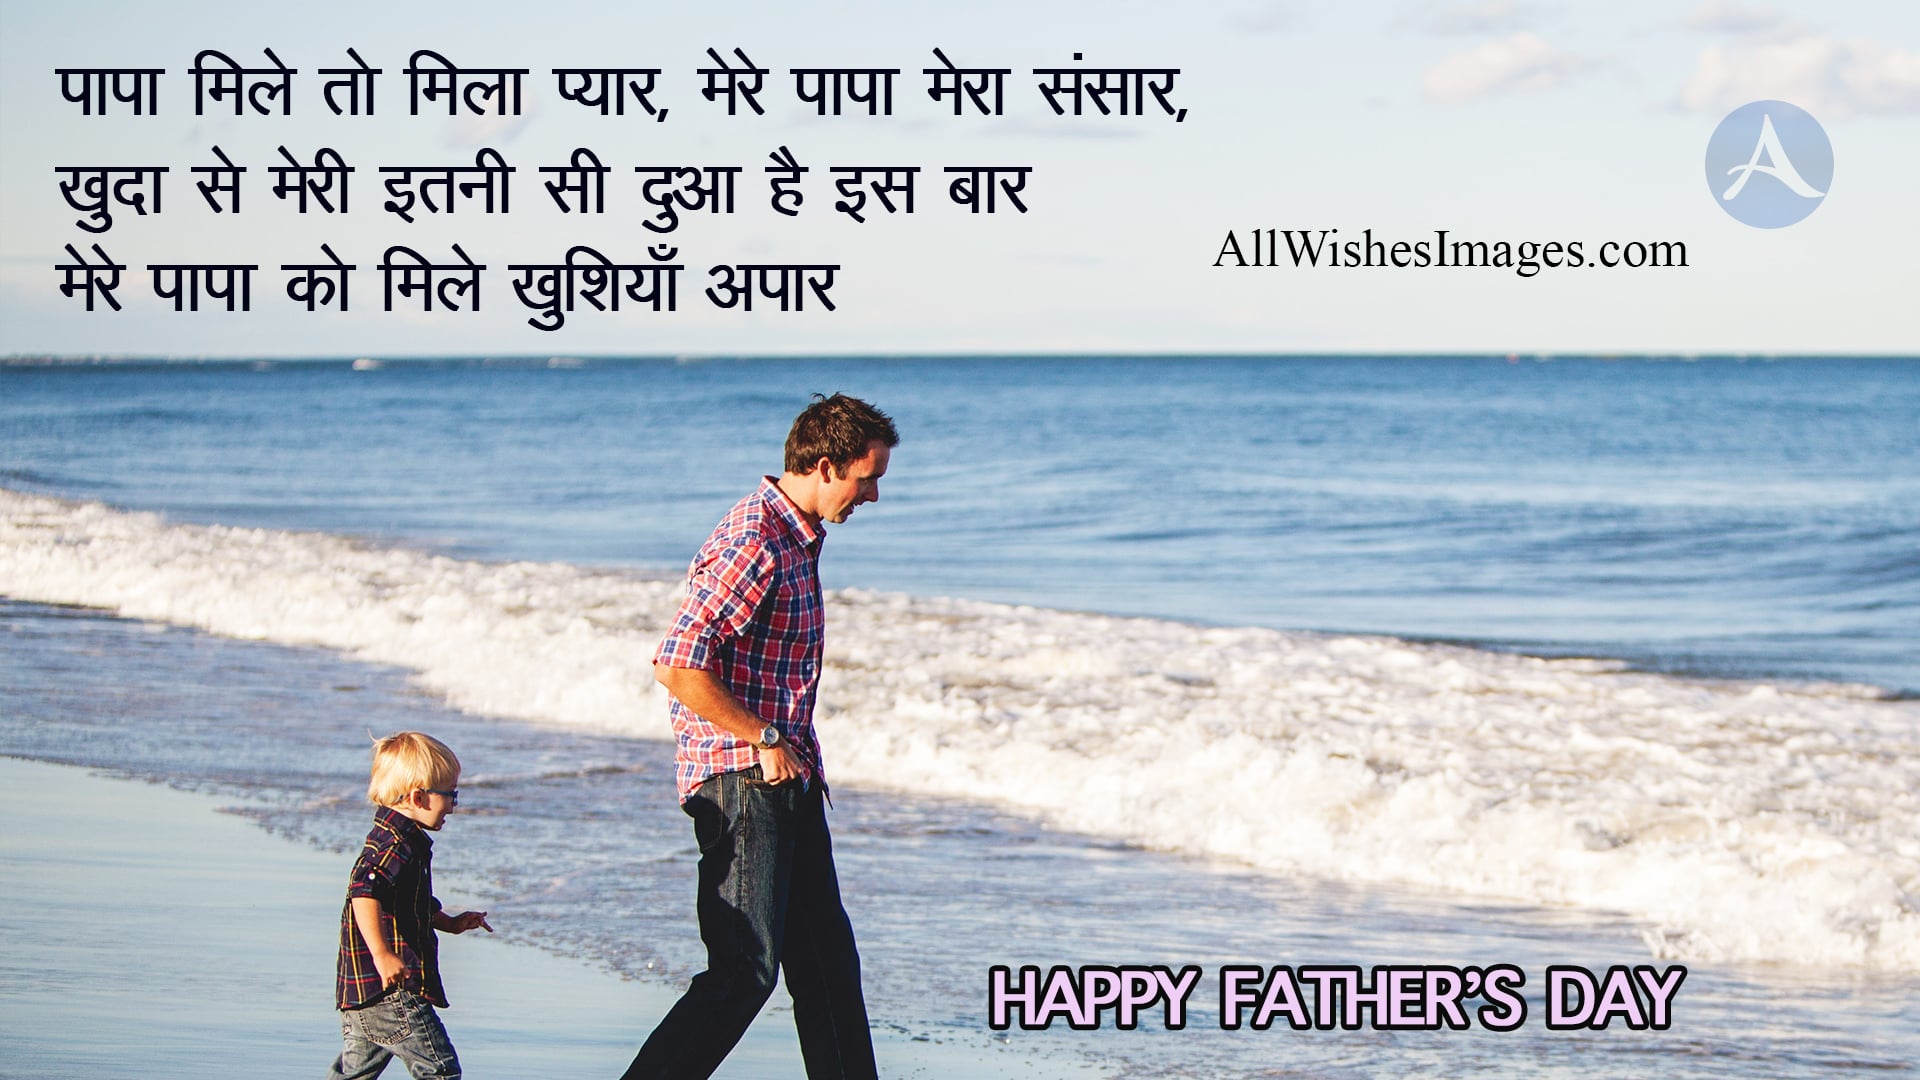 father's day image in hindi - All Wishes Images - Images for WhatsApp